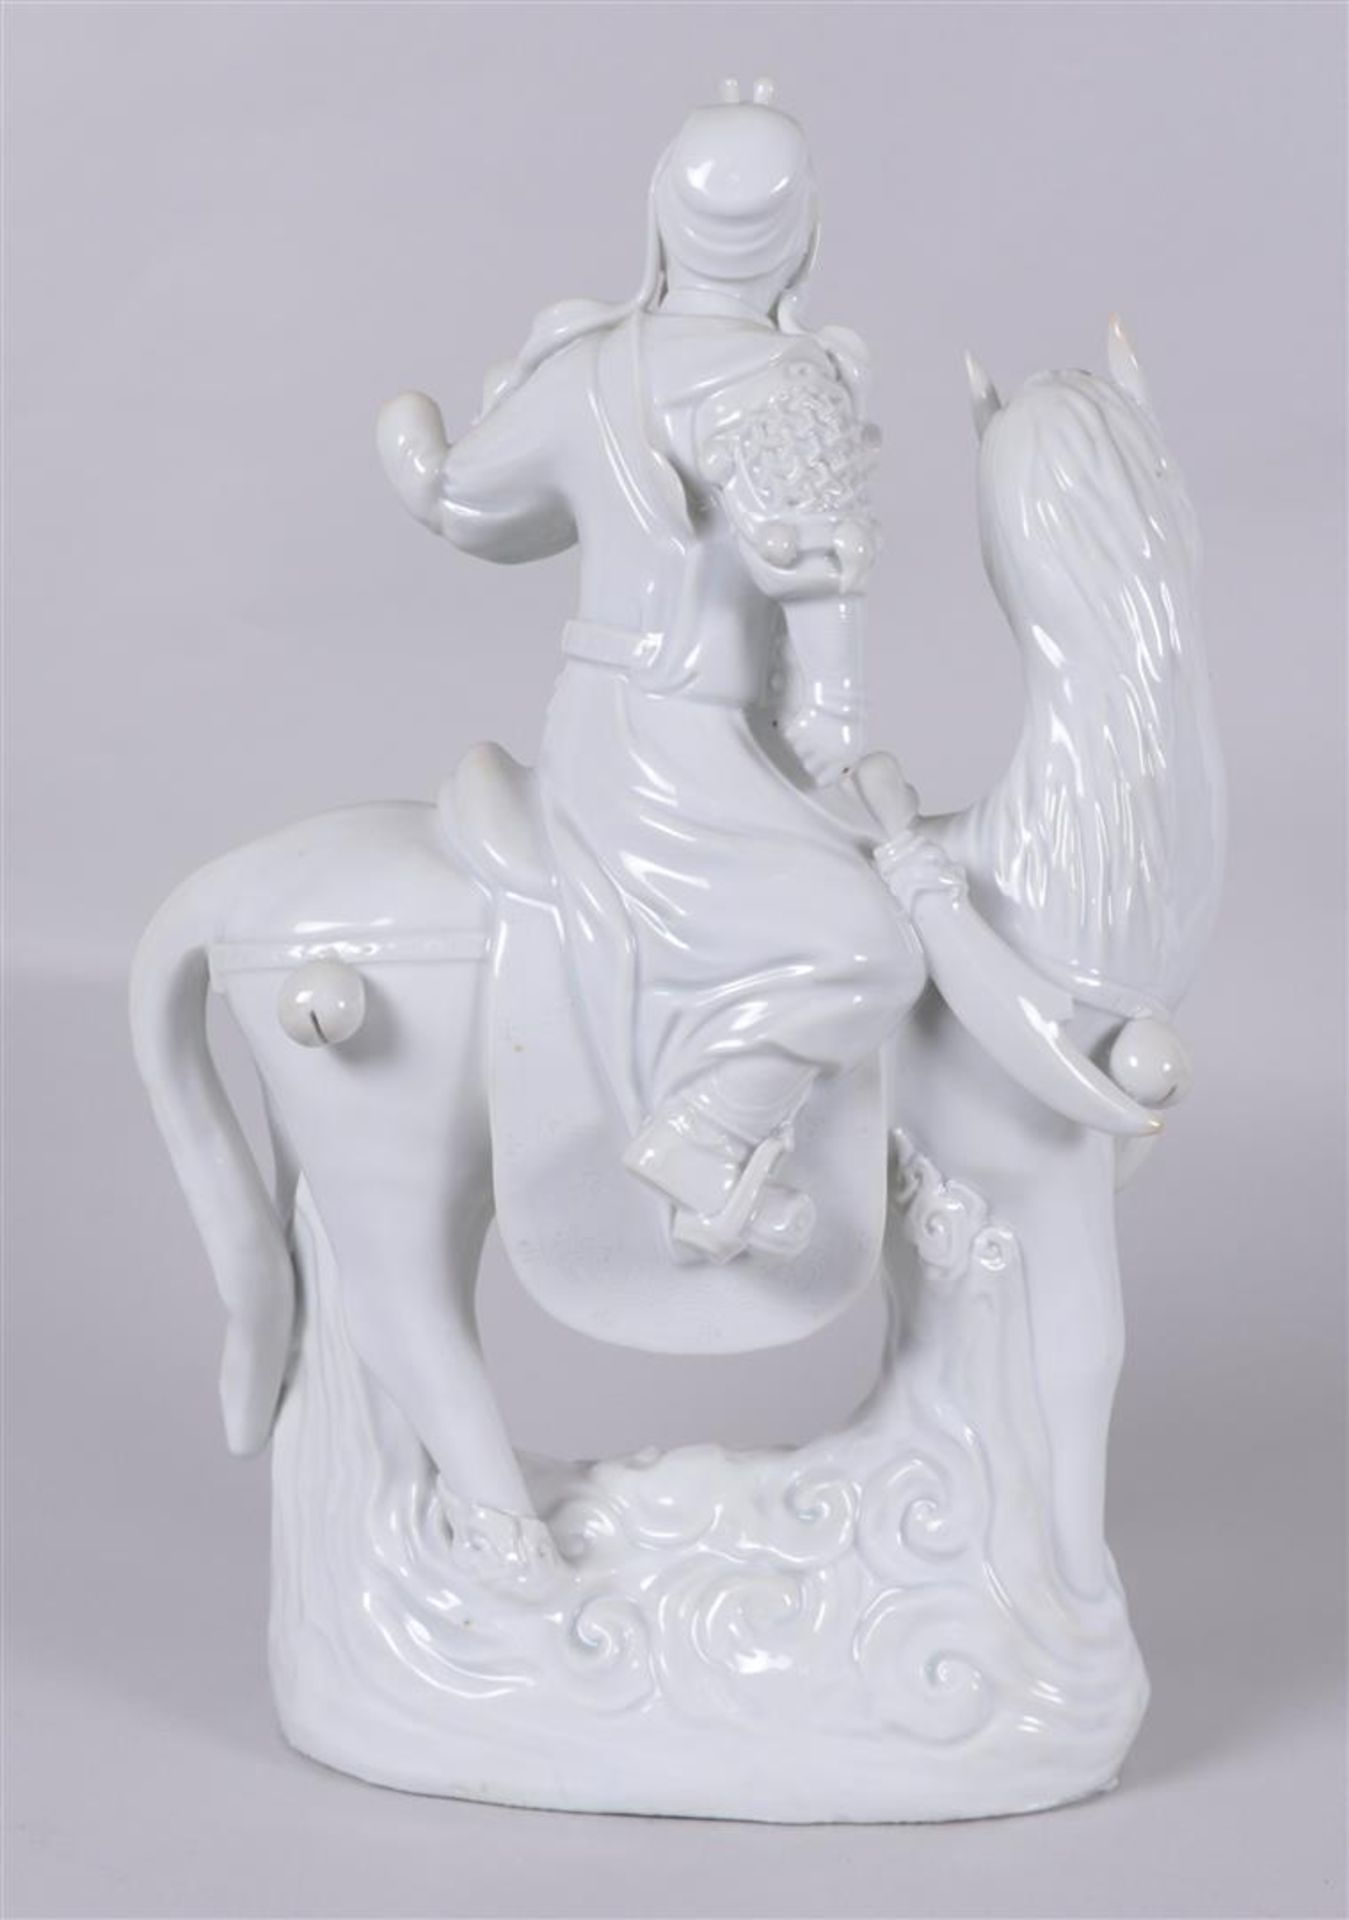 A blanc de Chine figure of a warrior on horseback. China, 20th century.
40 x 30 cm. - Image 3 of 3